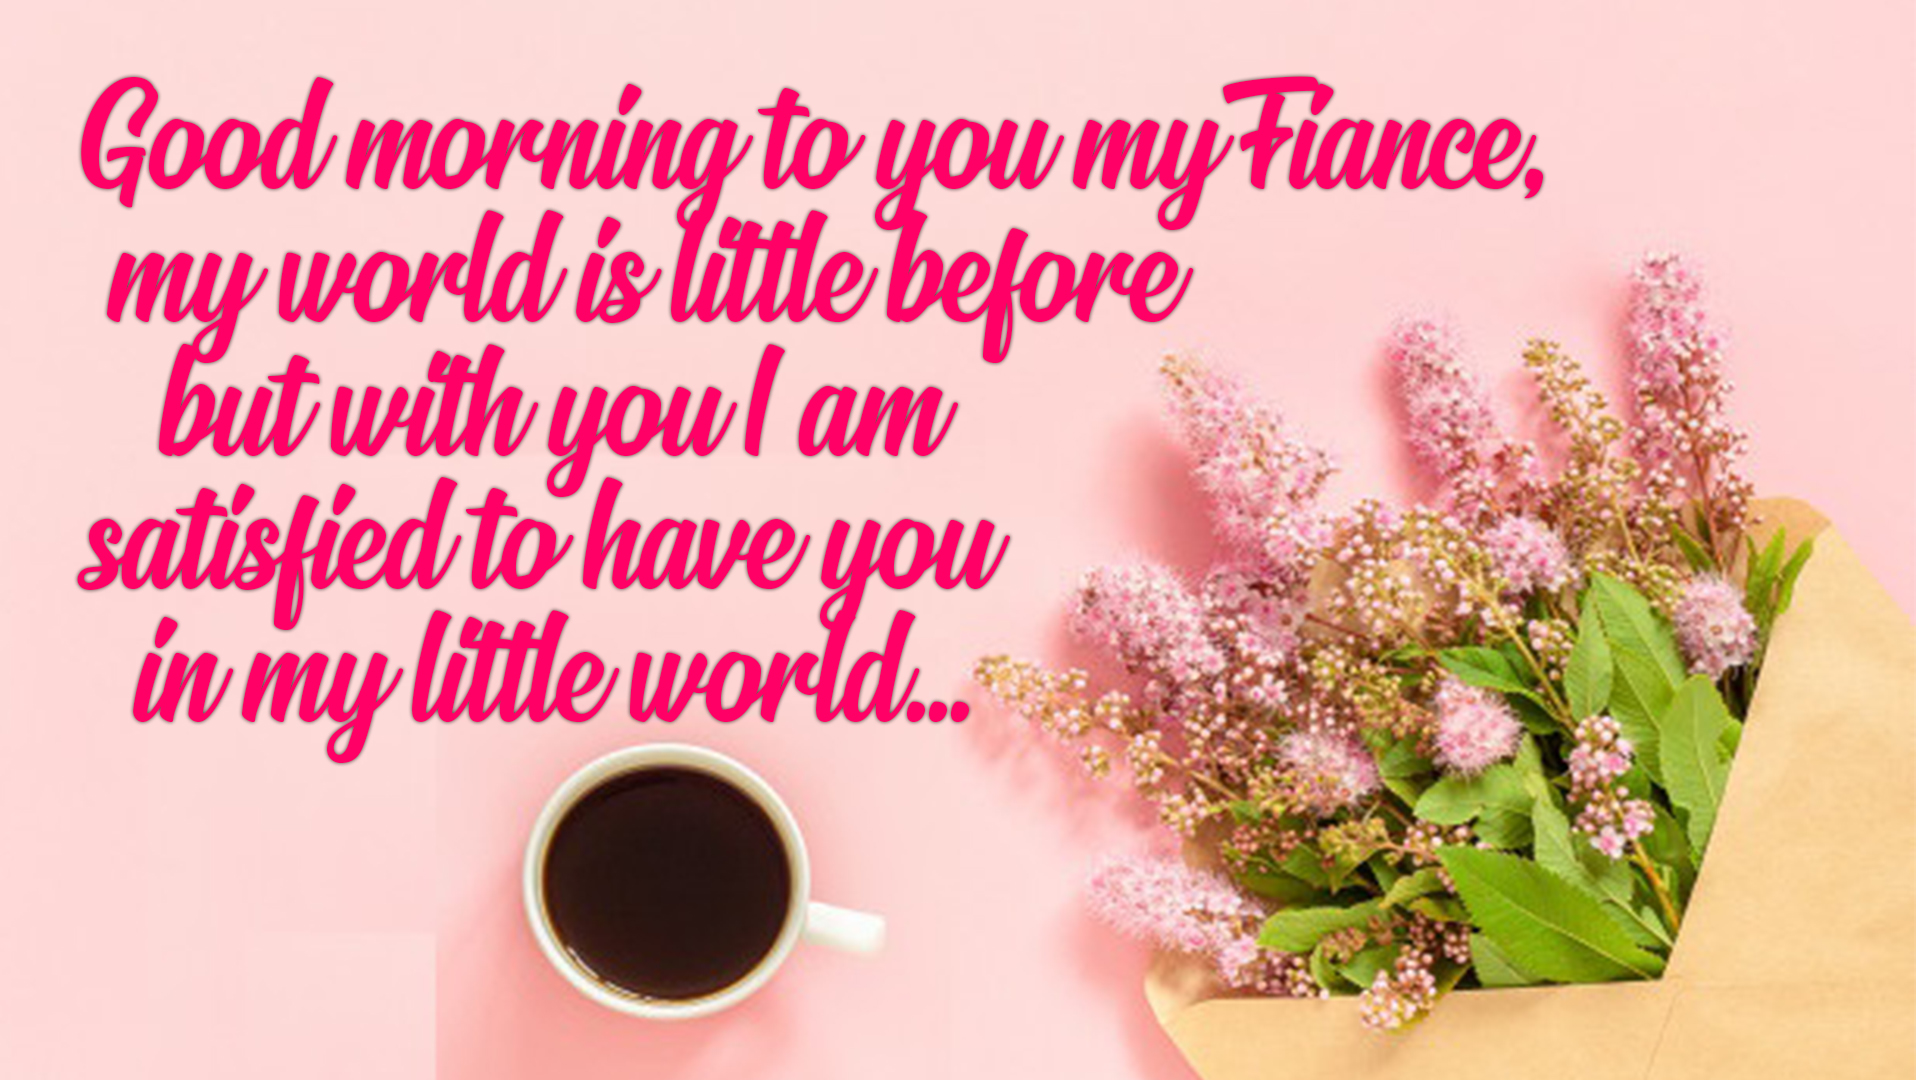 Good Morning Wishes For Fiance With Images | Good Morning Messages